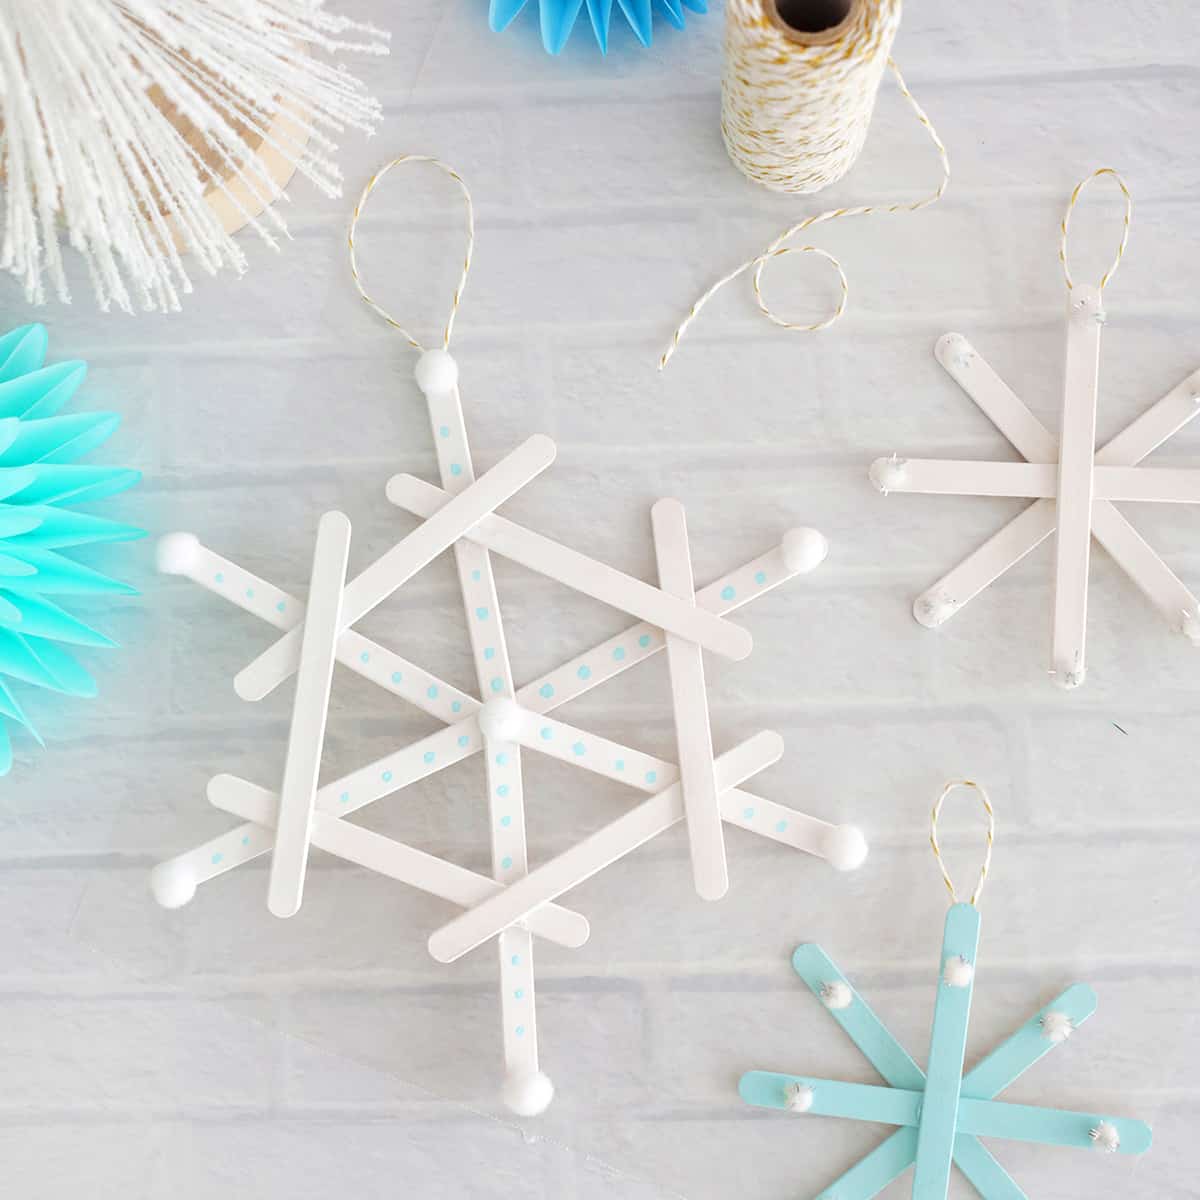 25+ Snowflake Crafts for Kids